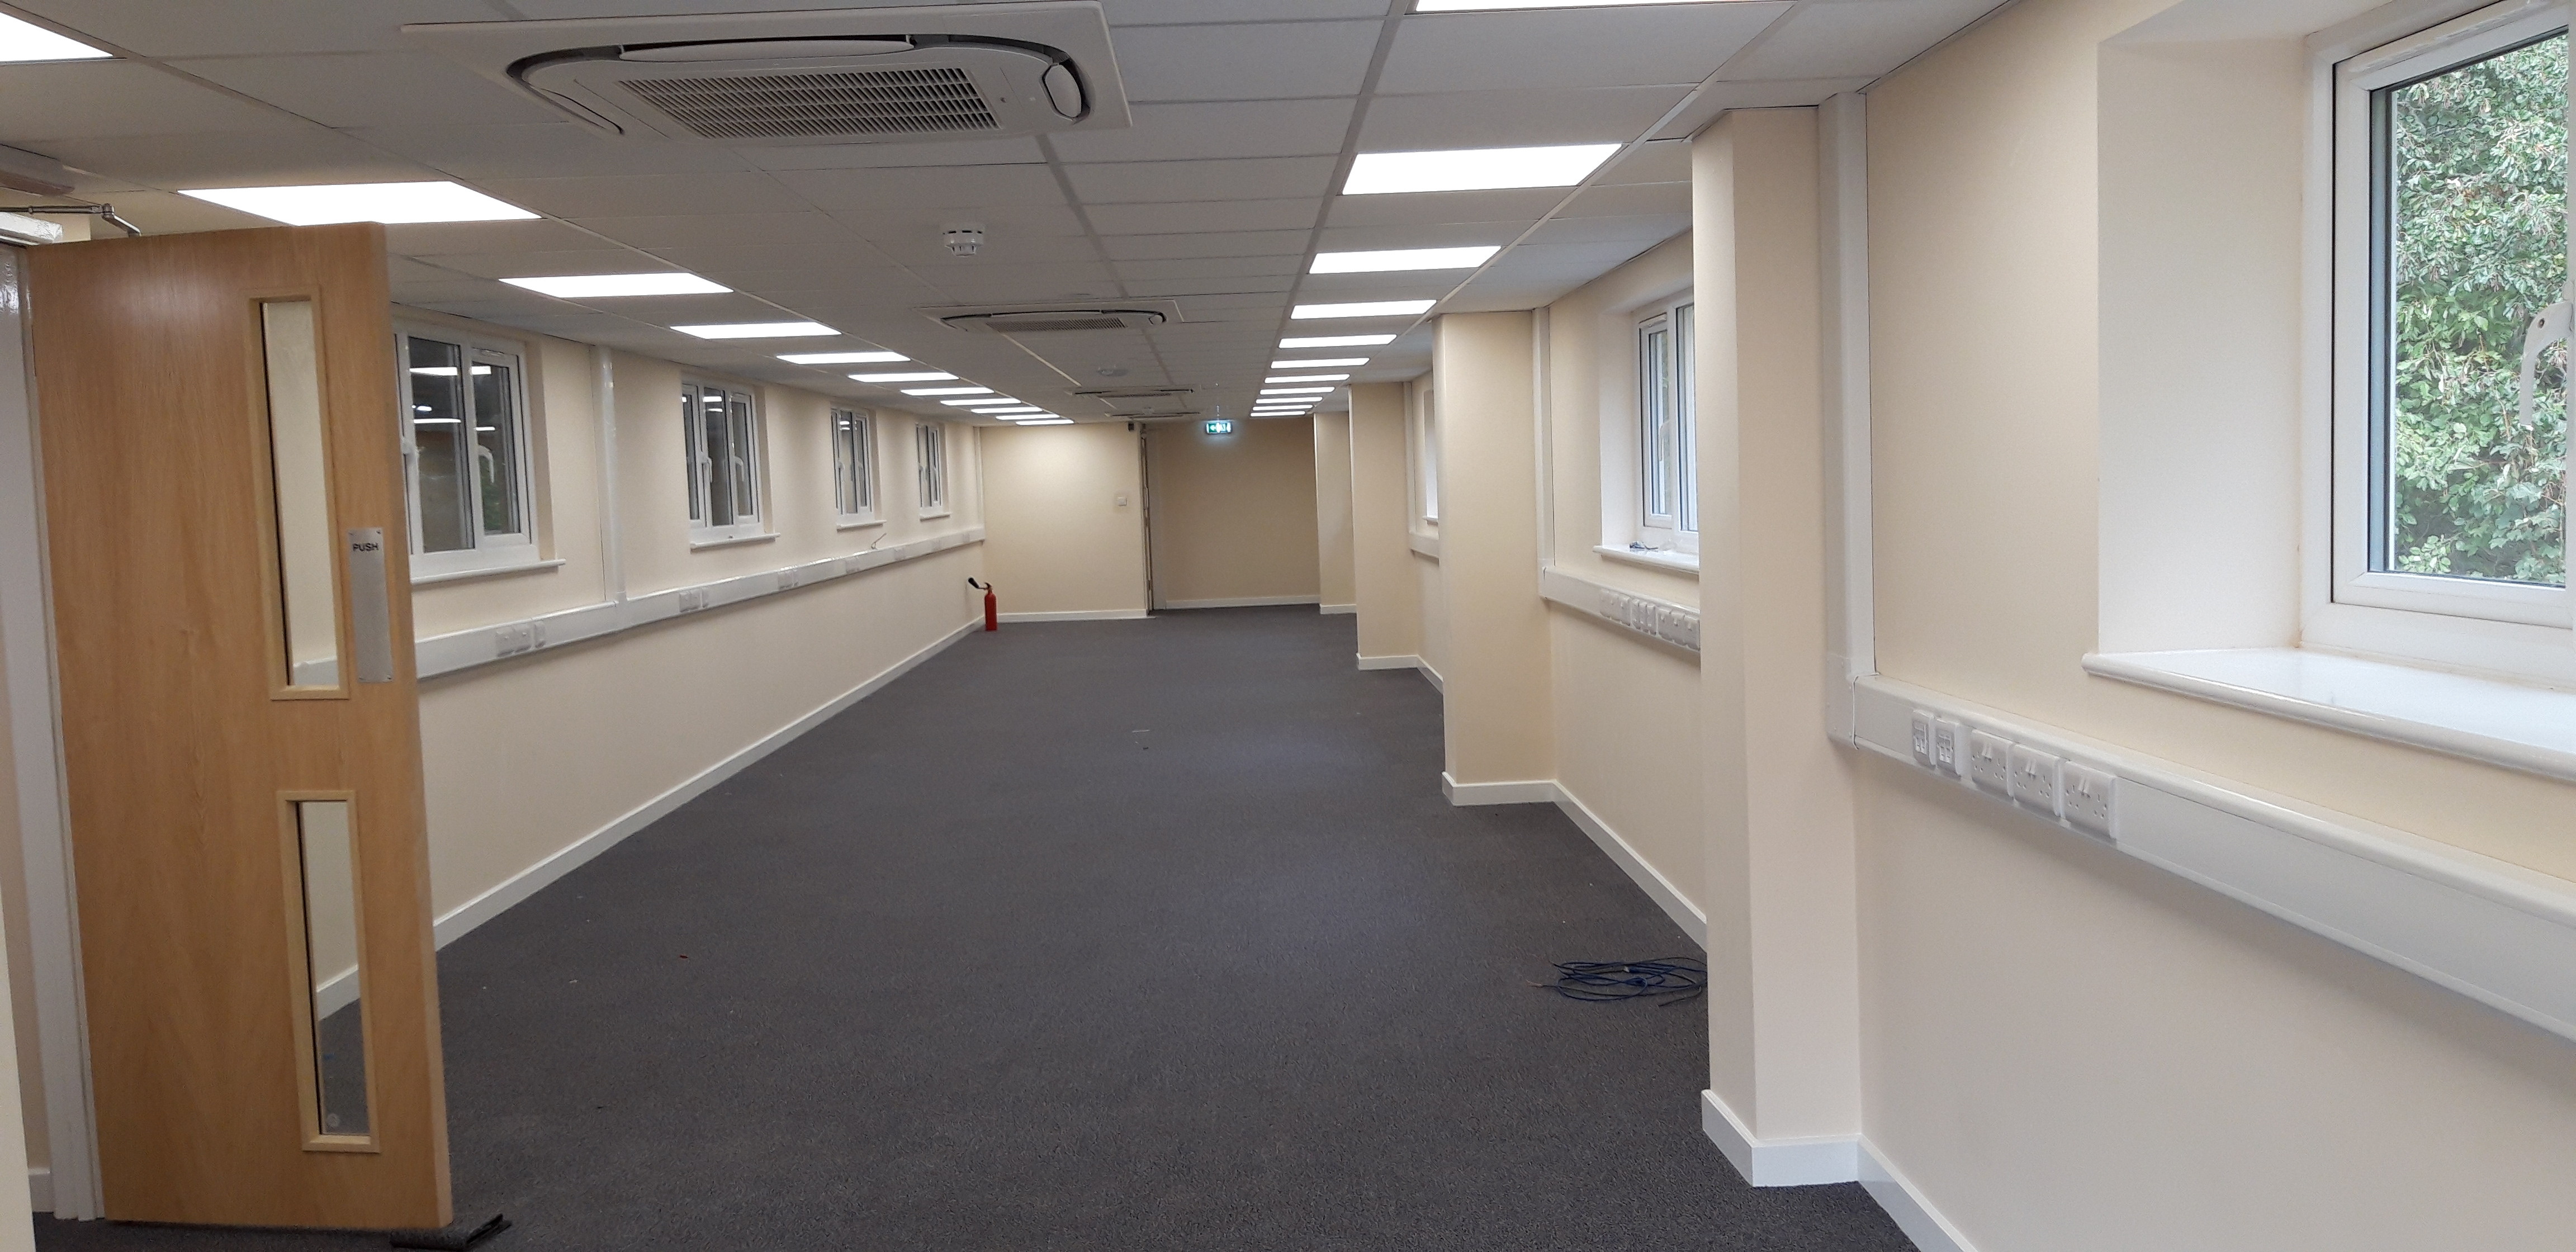 Commercial electrician to rewire my business premises in bristol